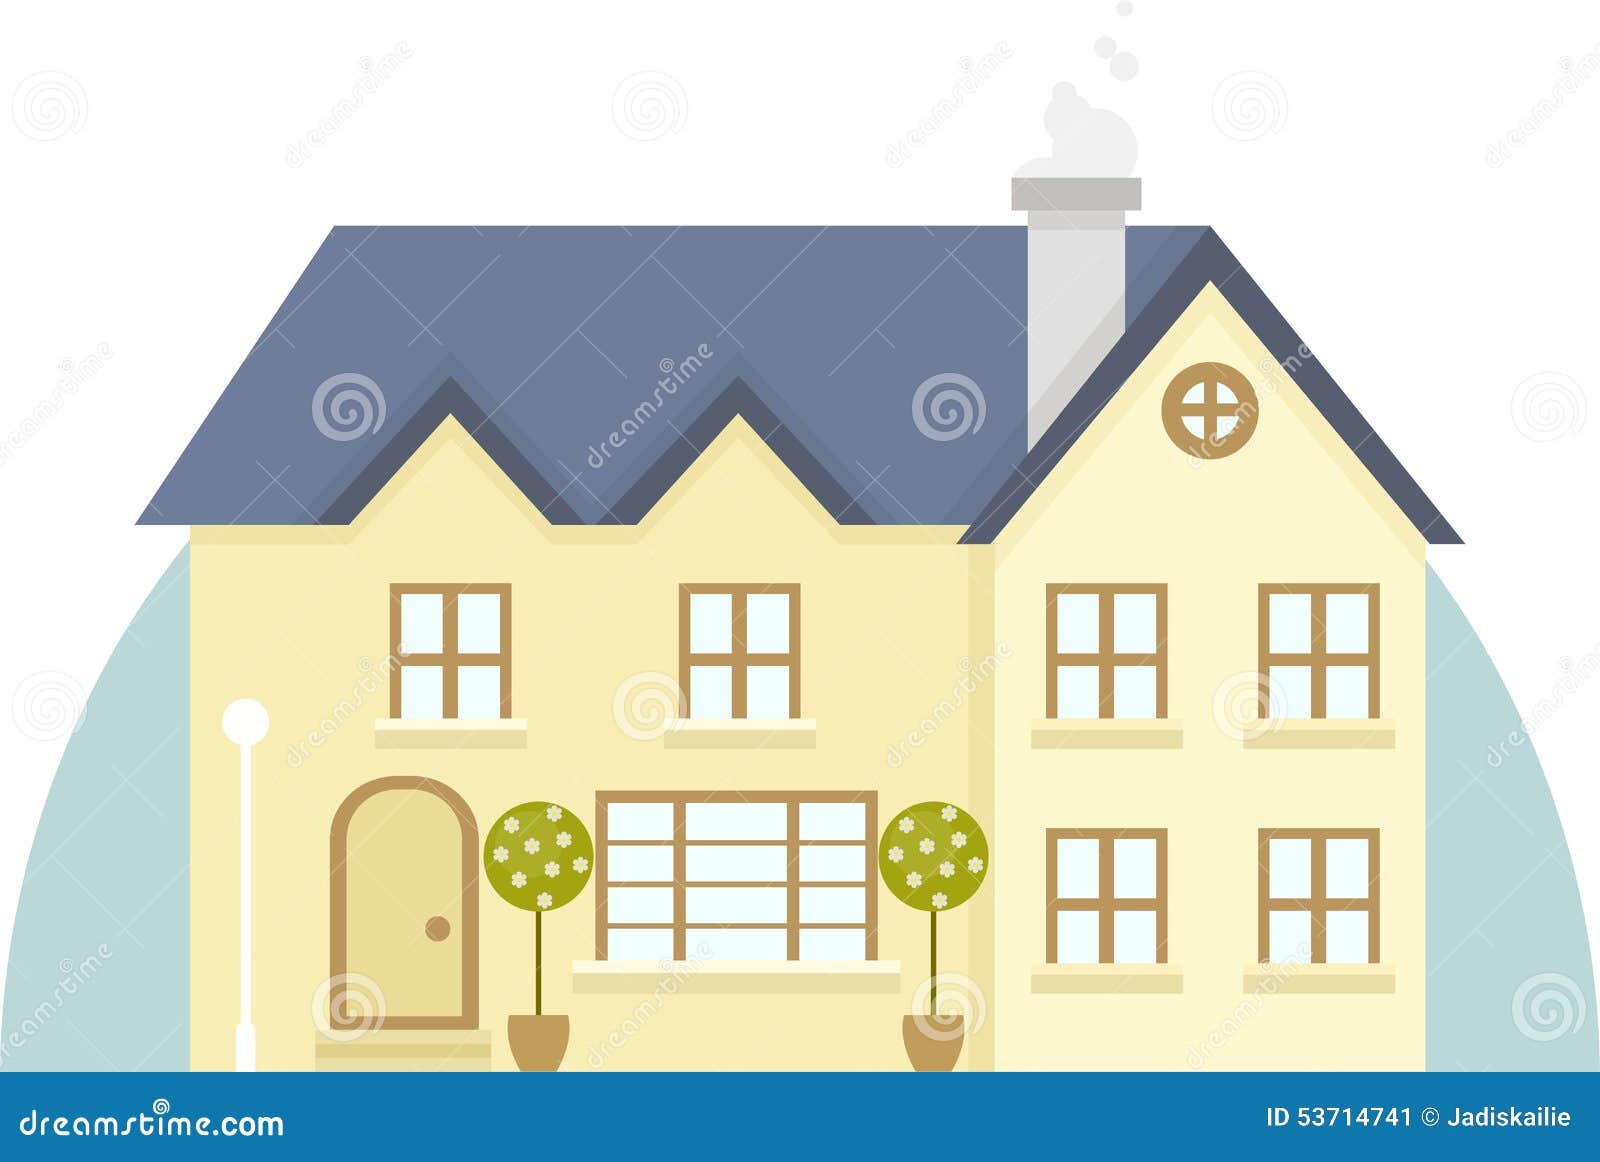 Vector Two Story House Icon Stock Vector - Image: 53714741